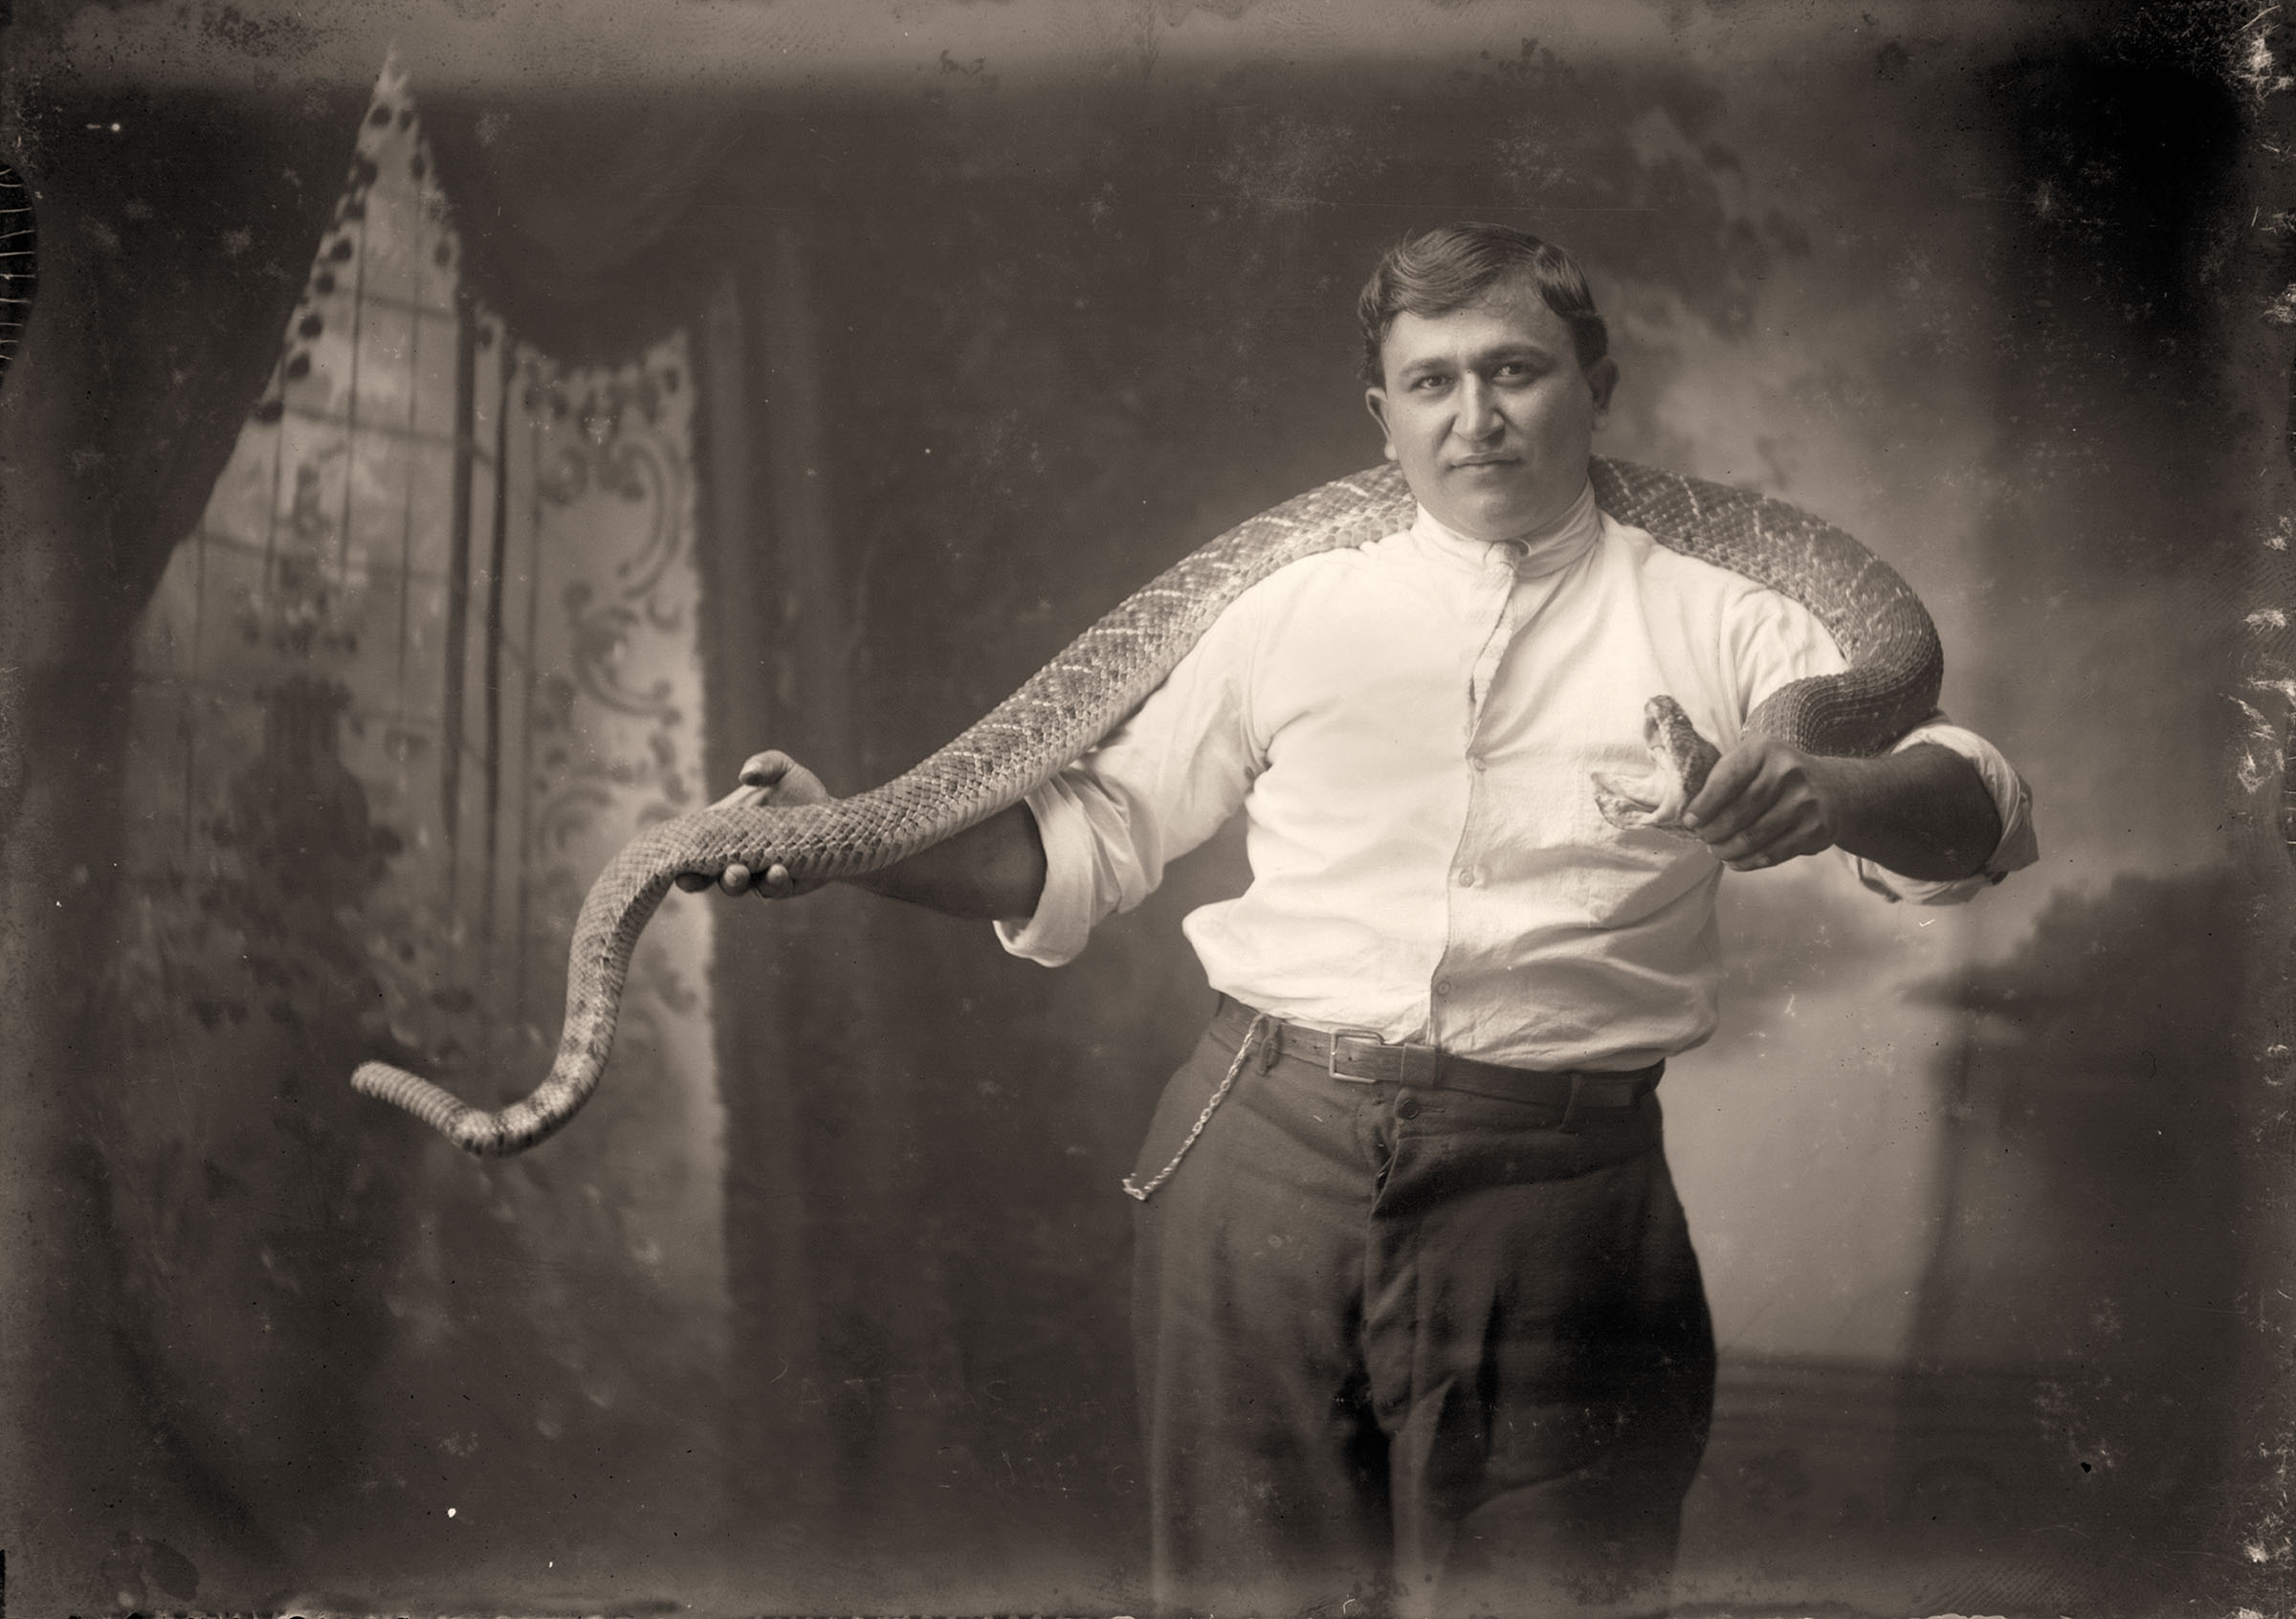 A vintage photograph of a man in a white shirt holding a large snake